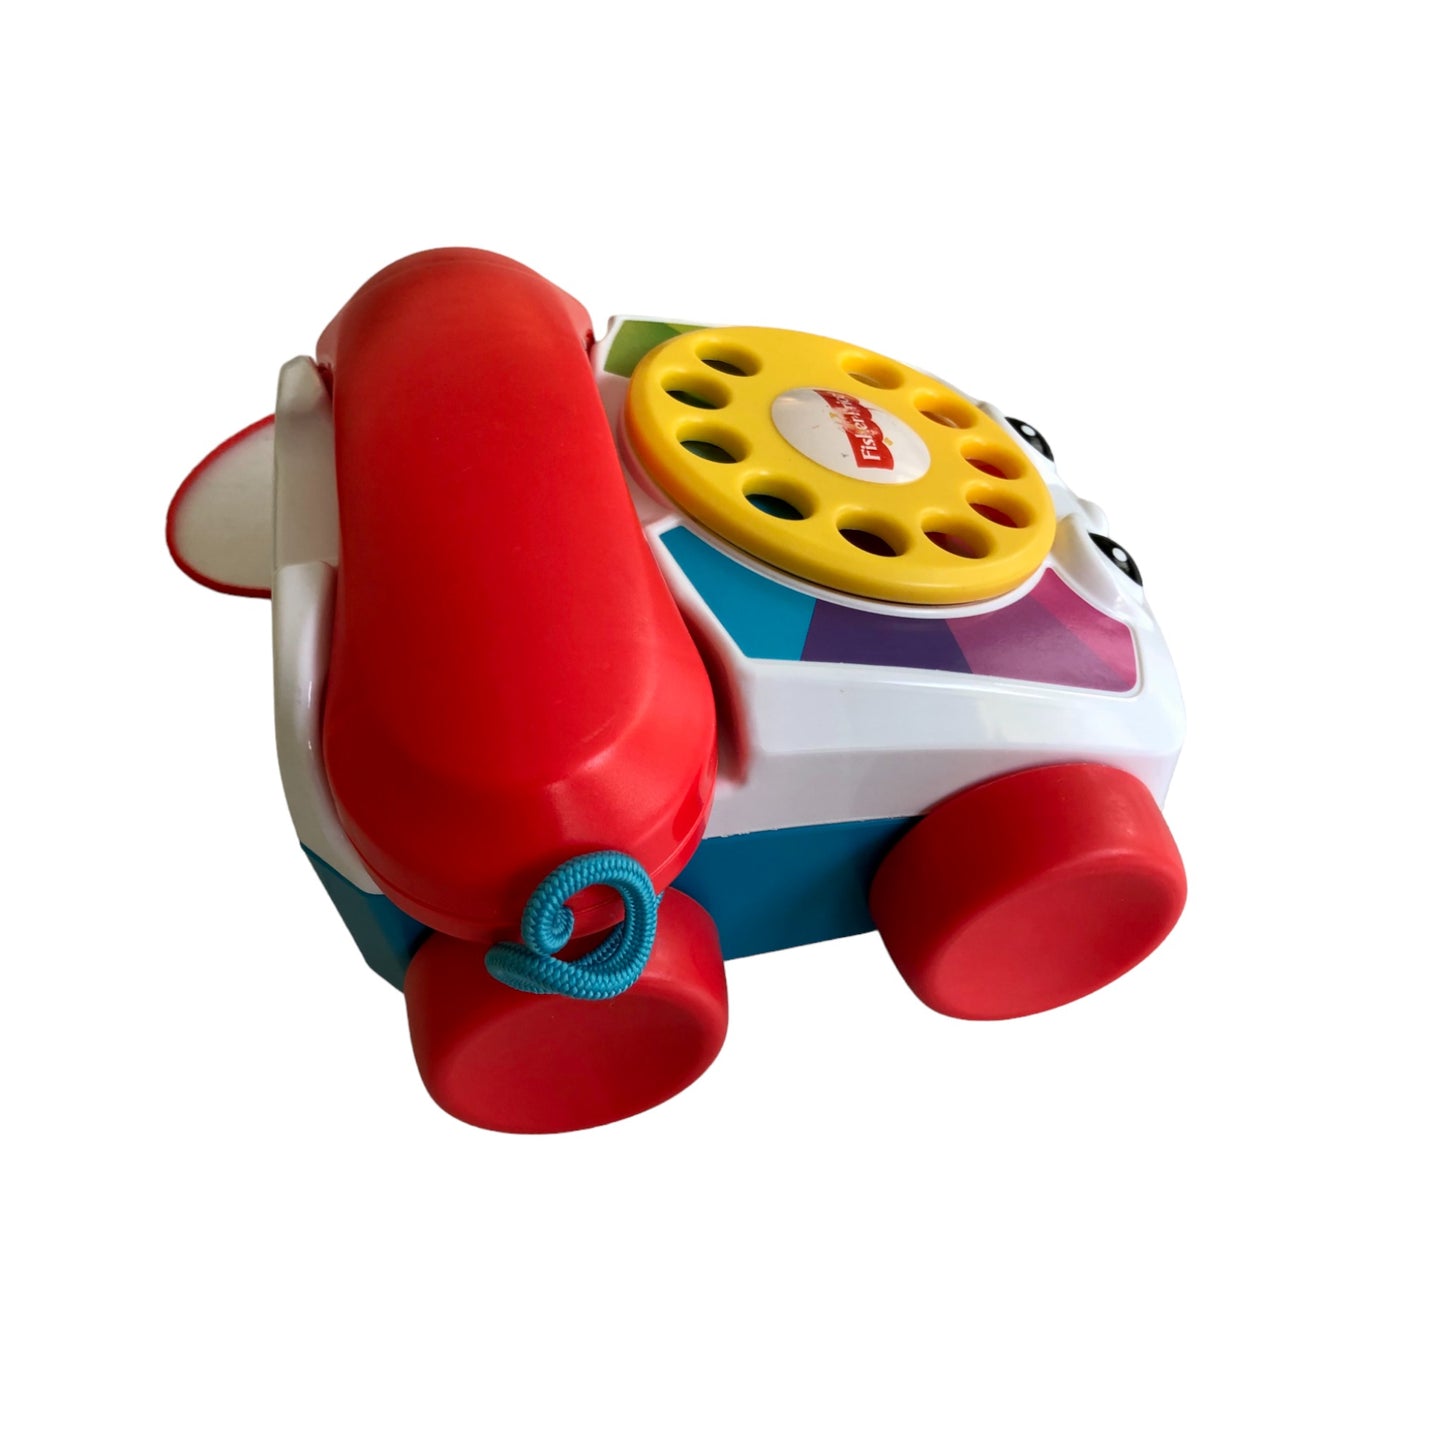 Fisher Price - Chatter Phone